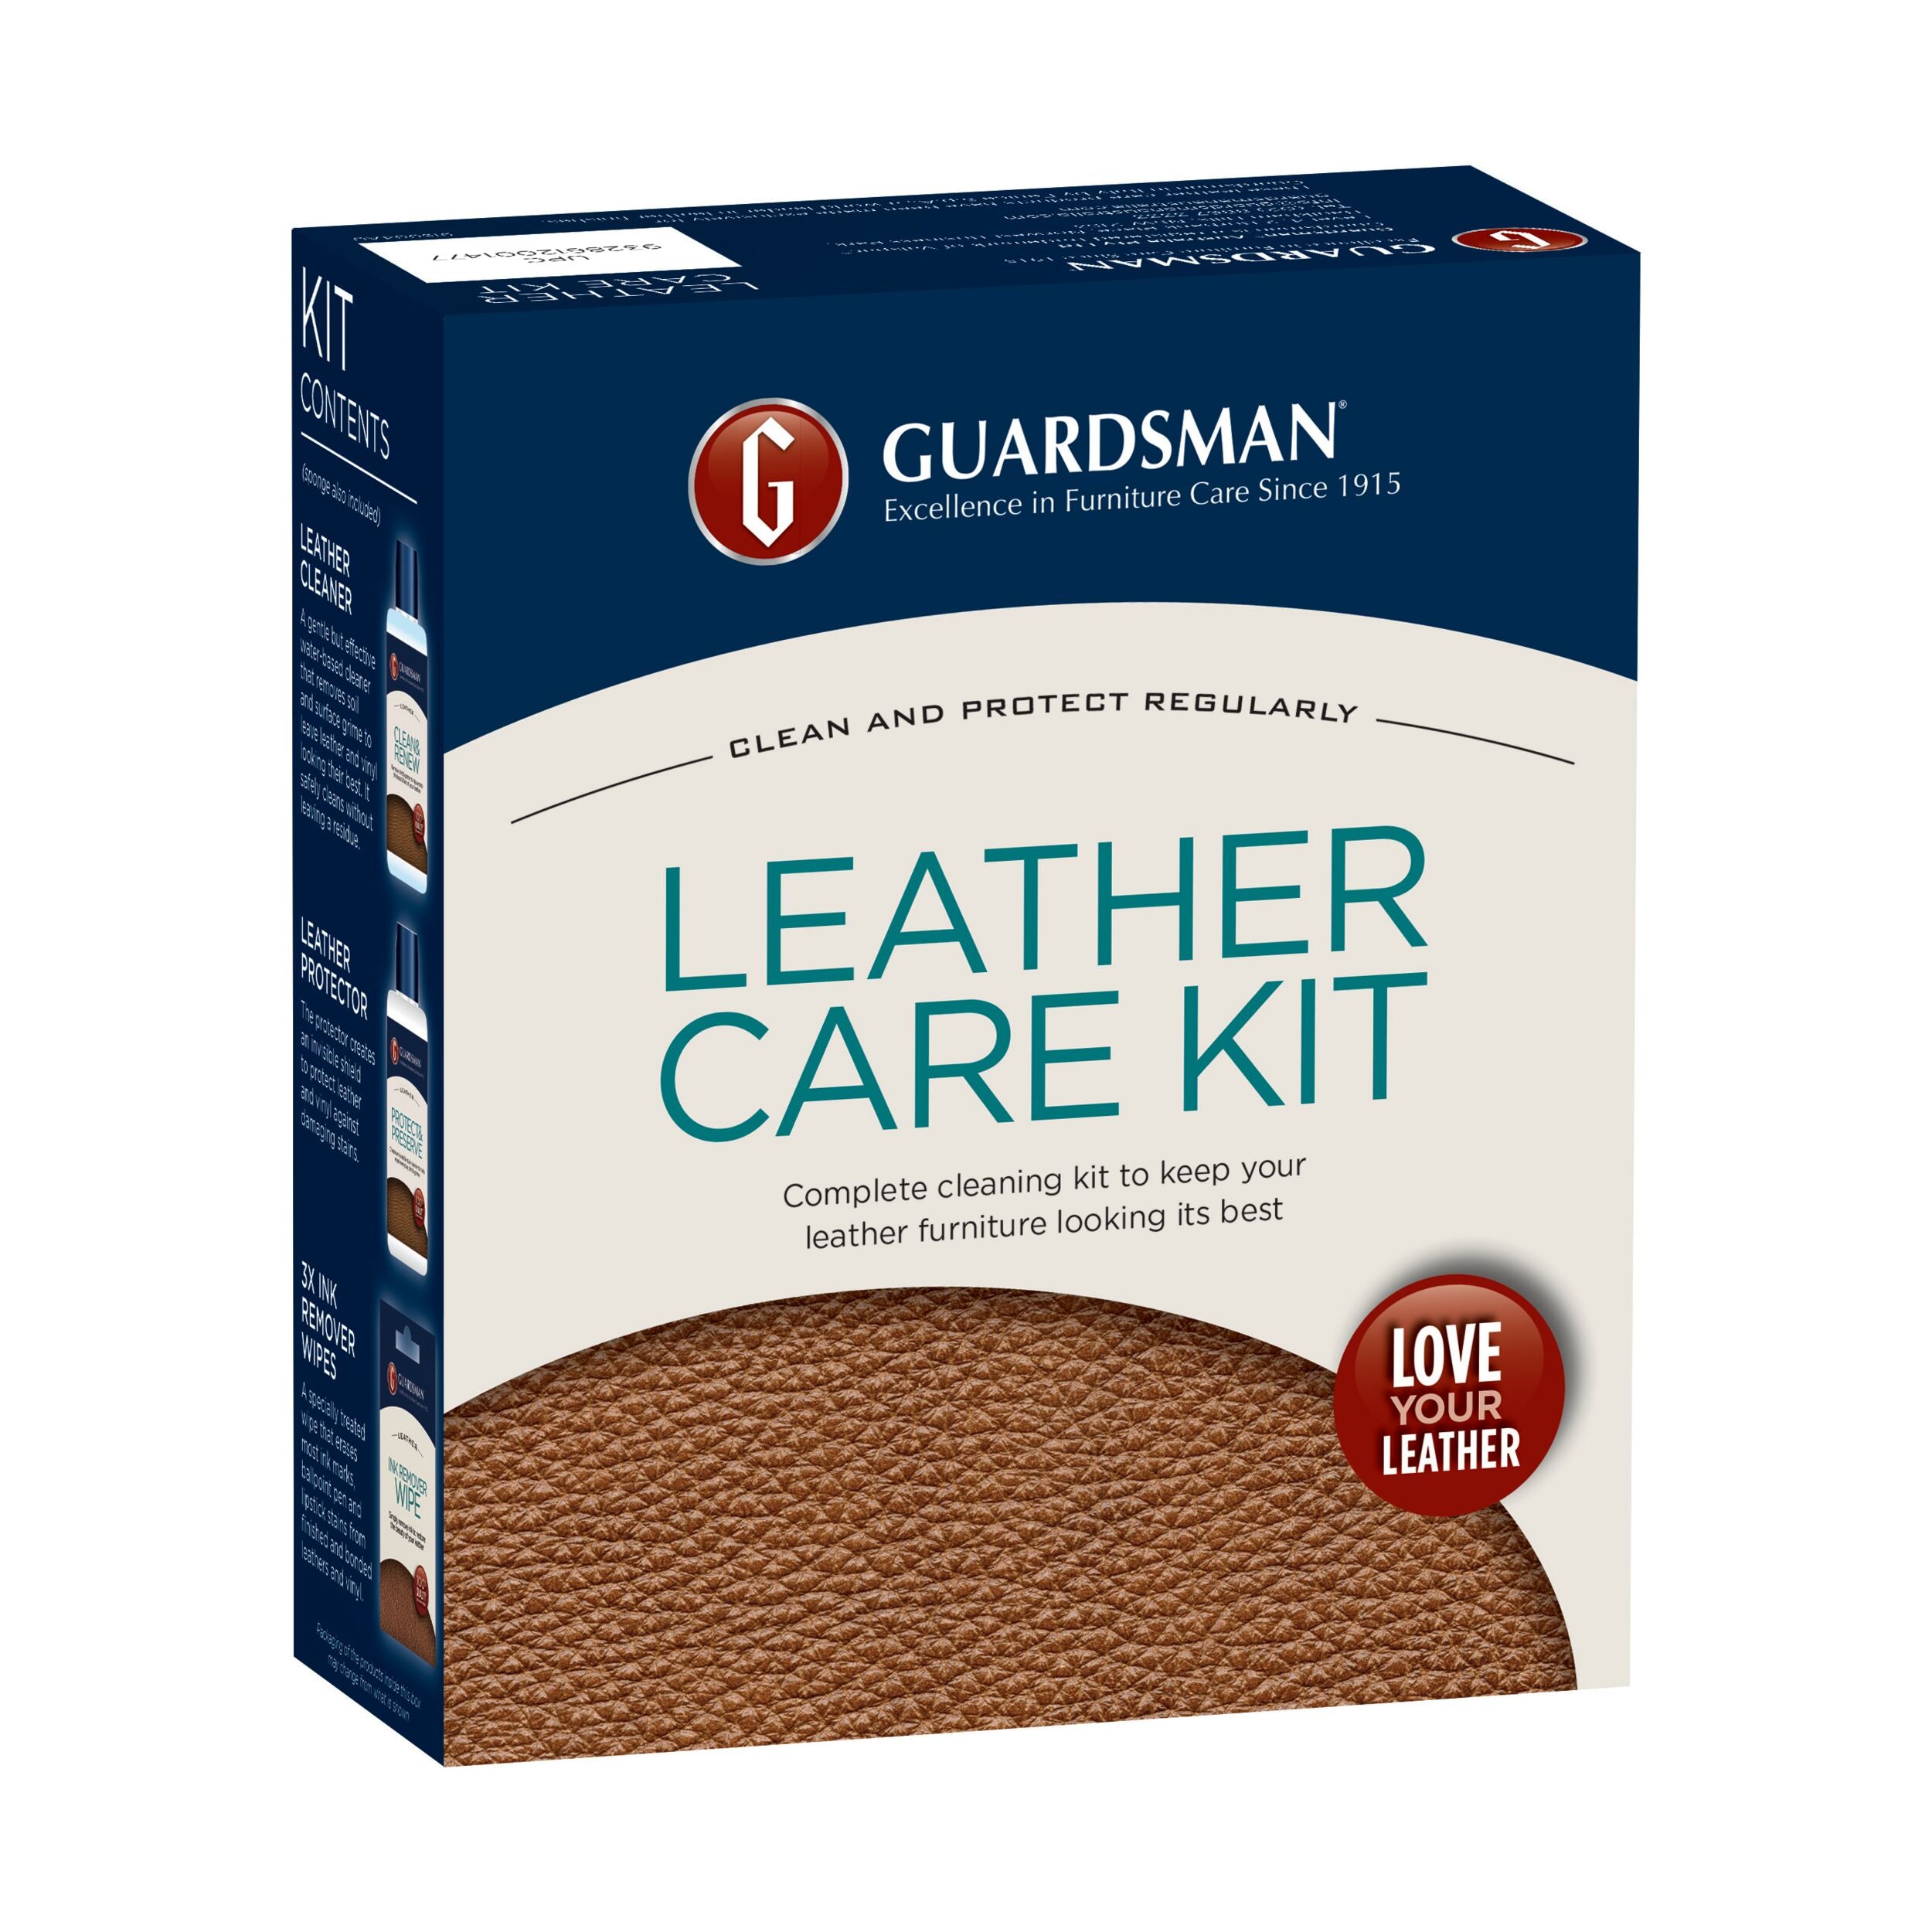 Care Leather Cleaner Wipes